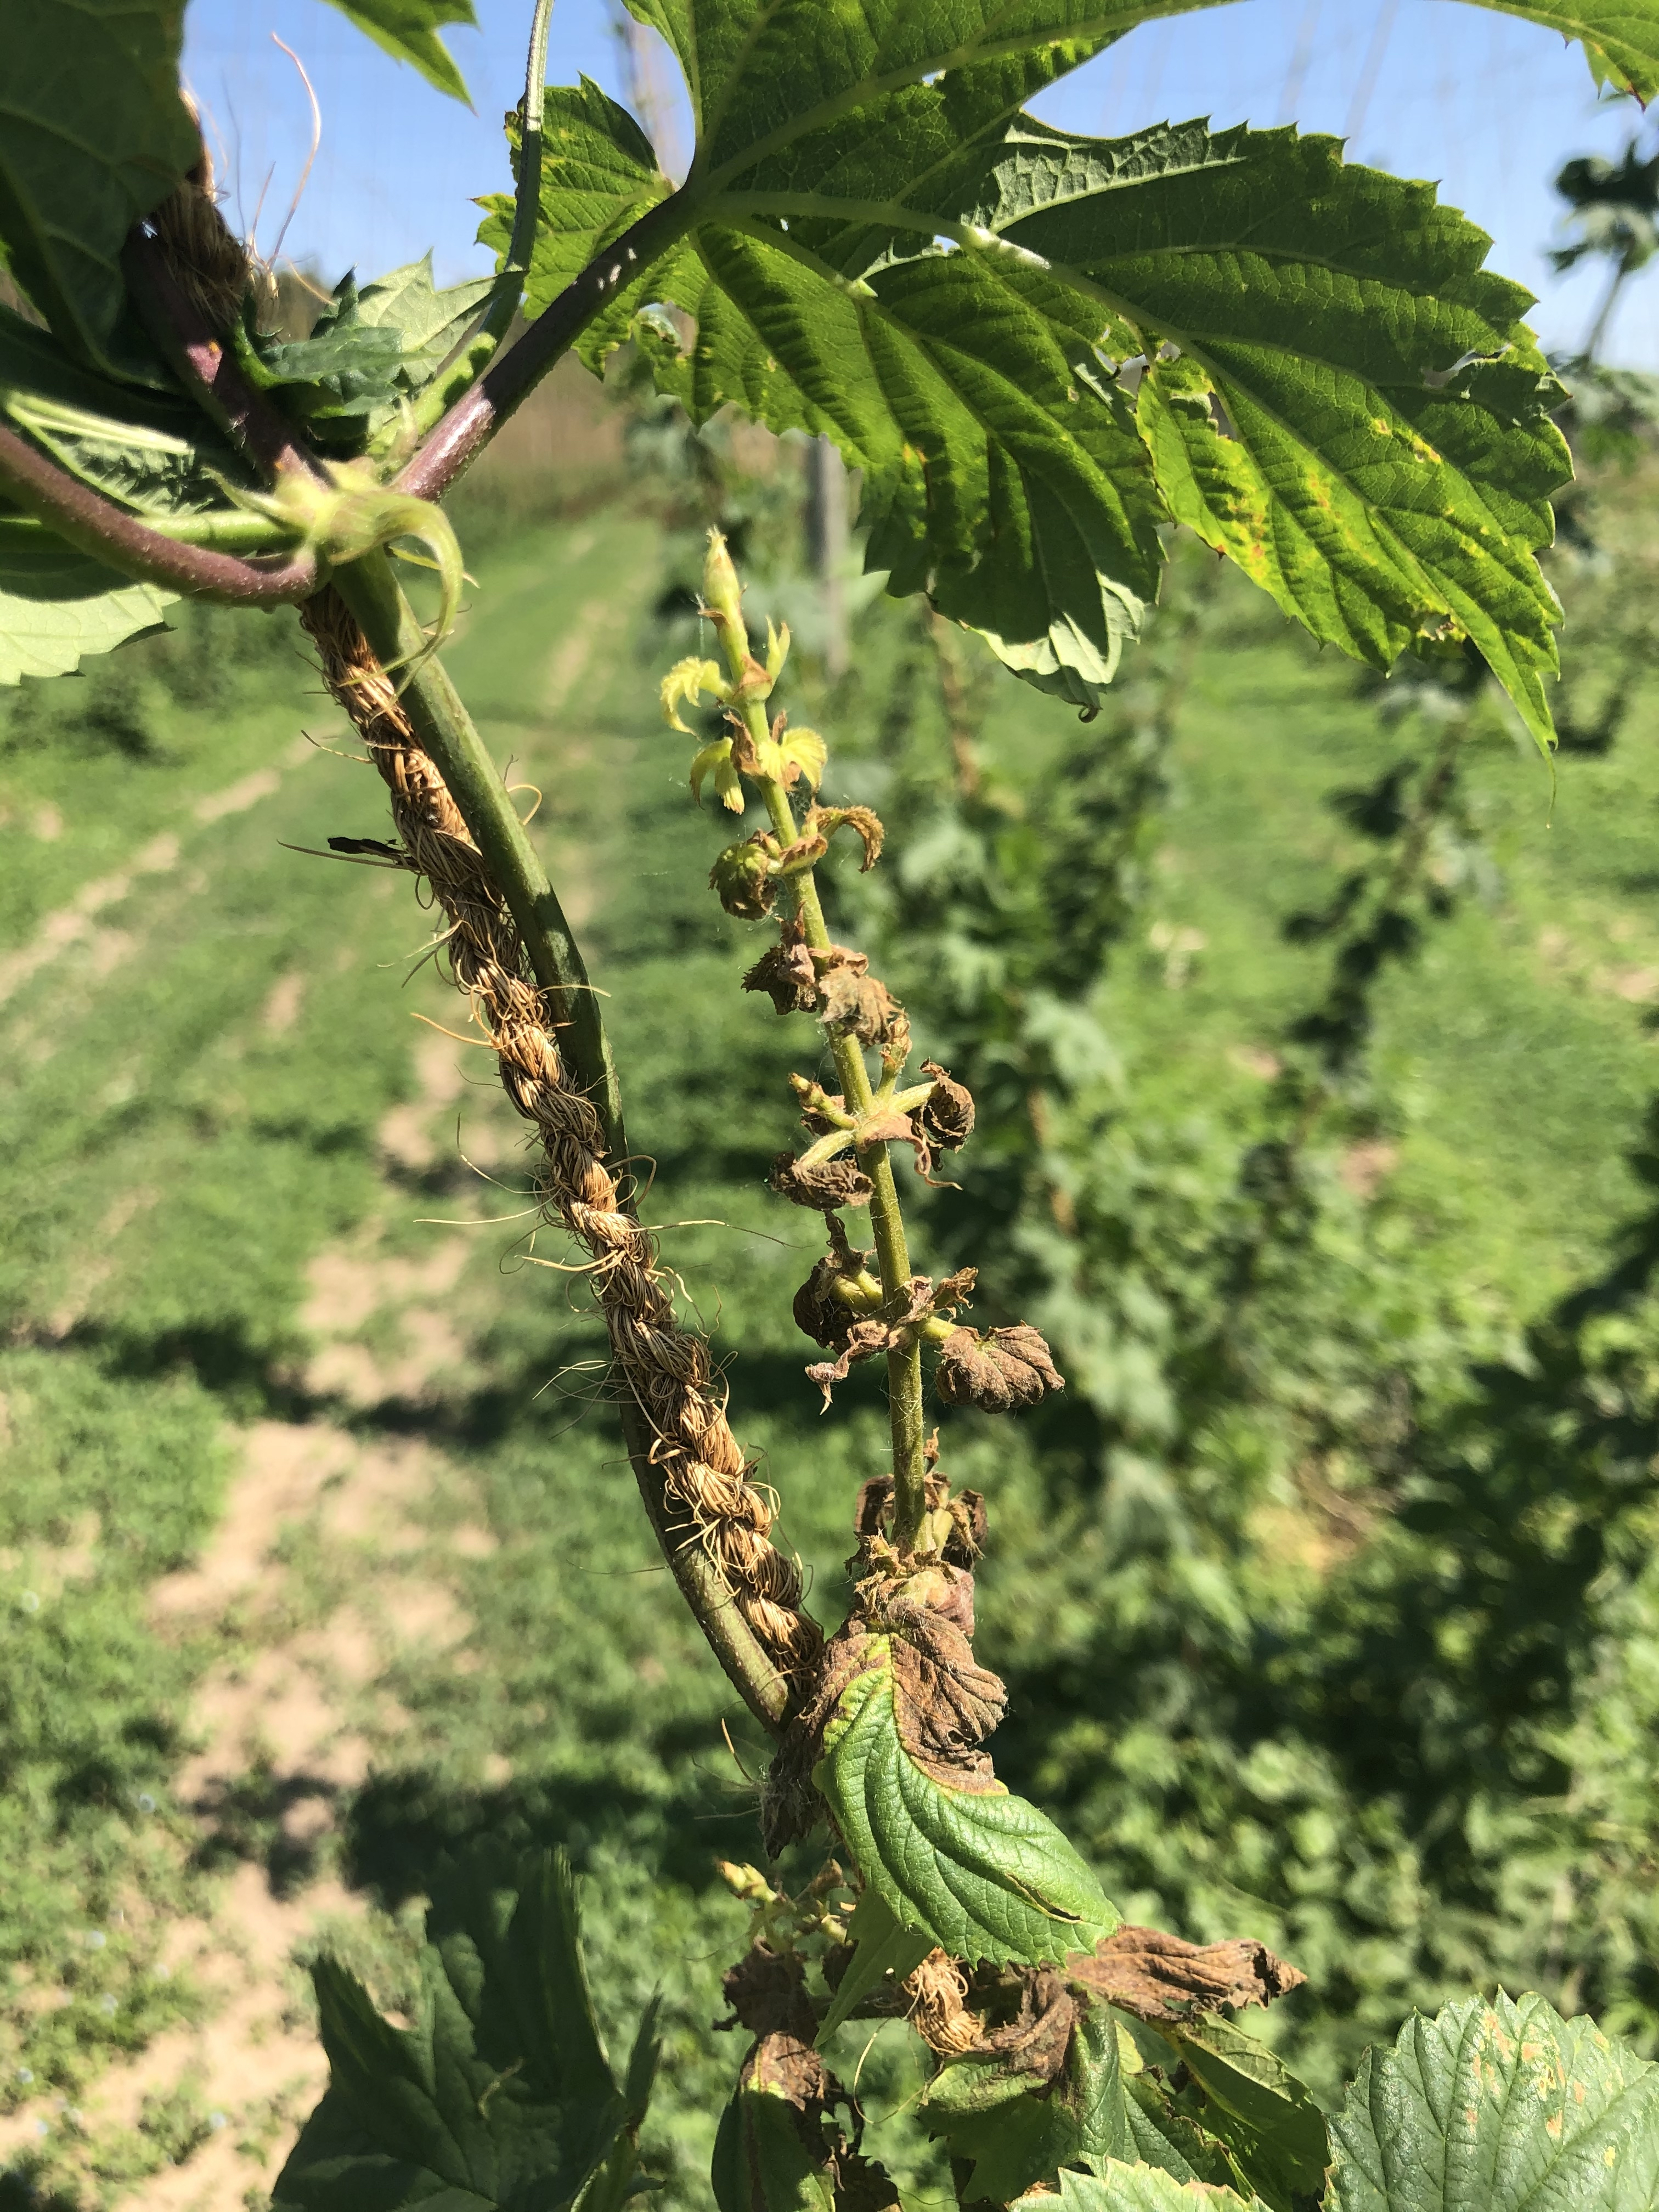 Lateral aerial spike which will cause this bine to prematurely die and not reach the wire. Photo by Timothy Miles.